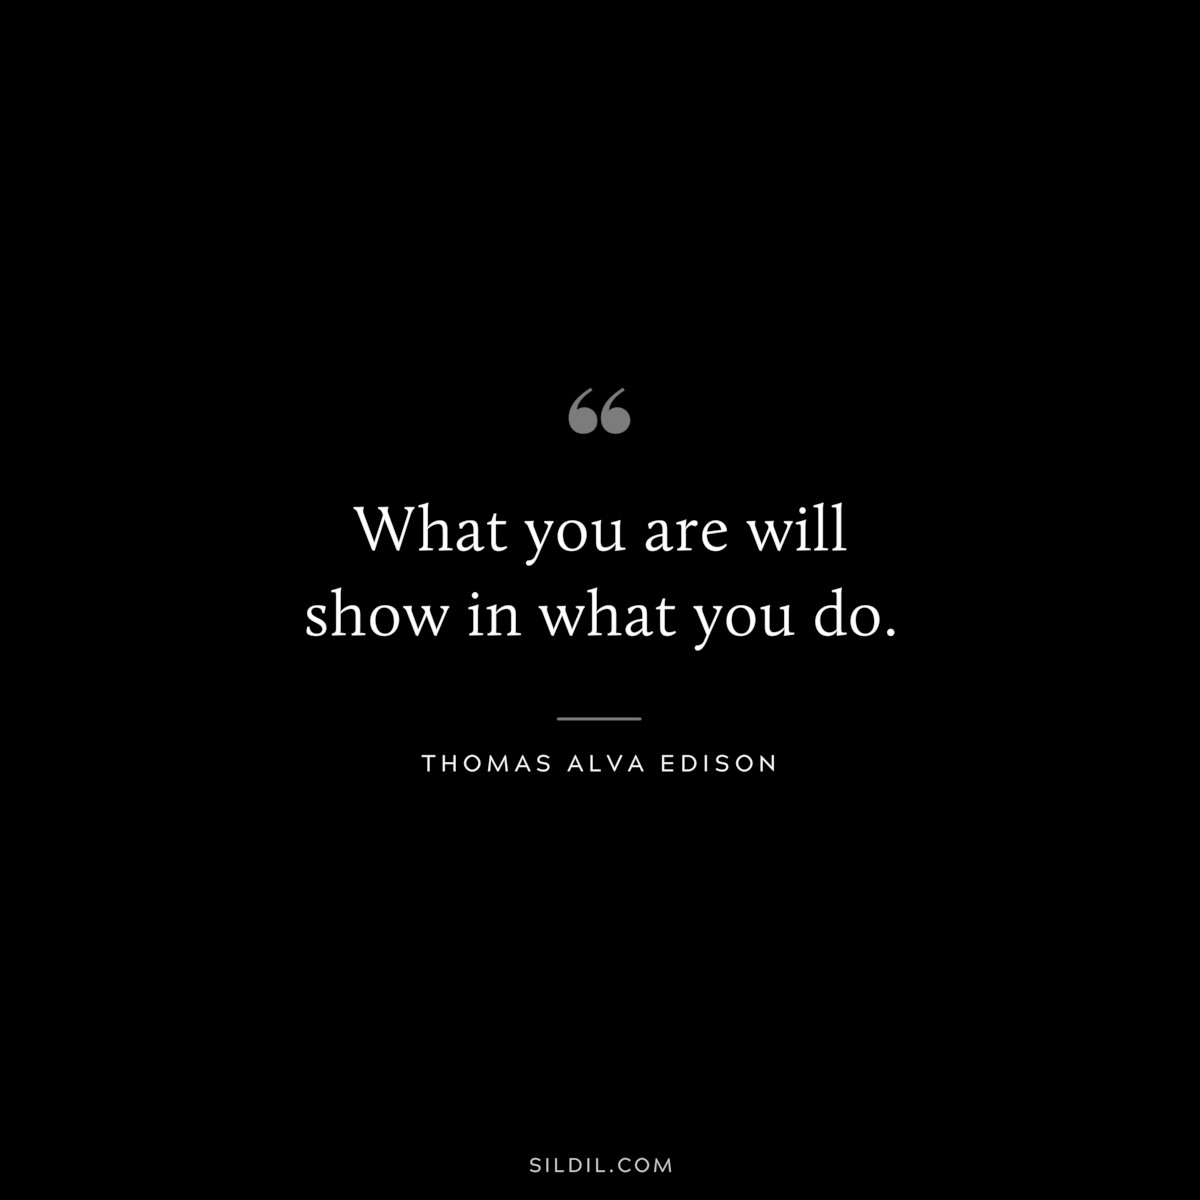 What you are will show in what you do. ― Thomas Alva Edison